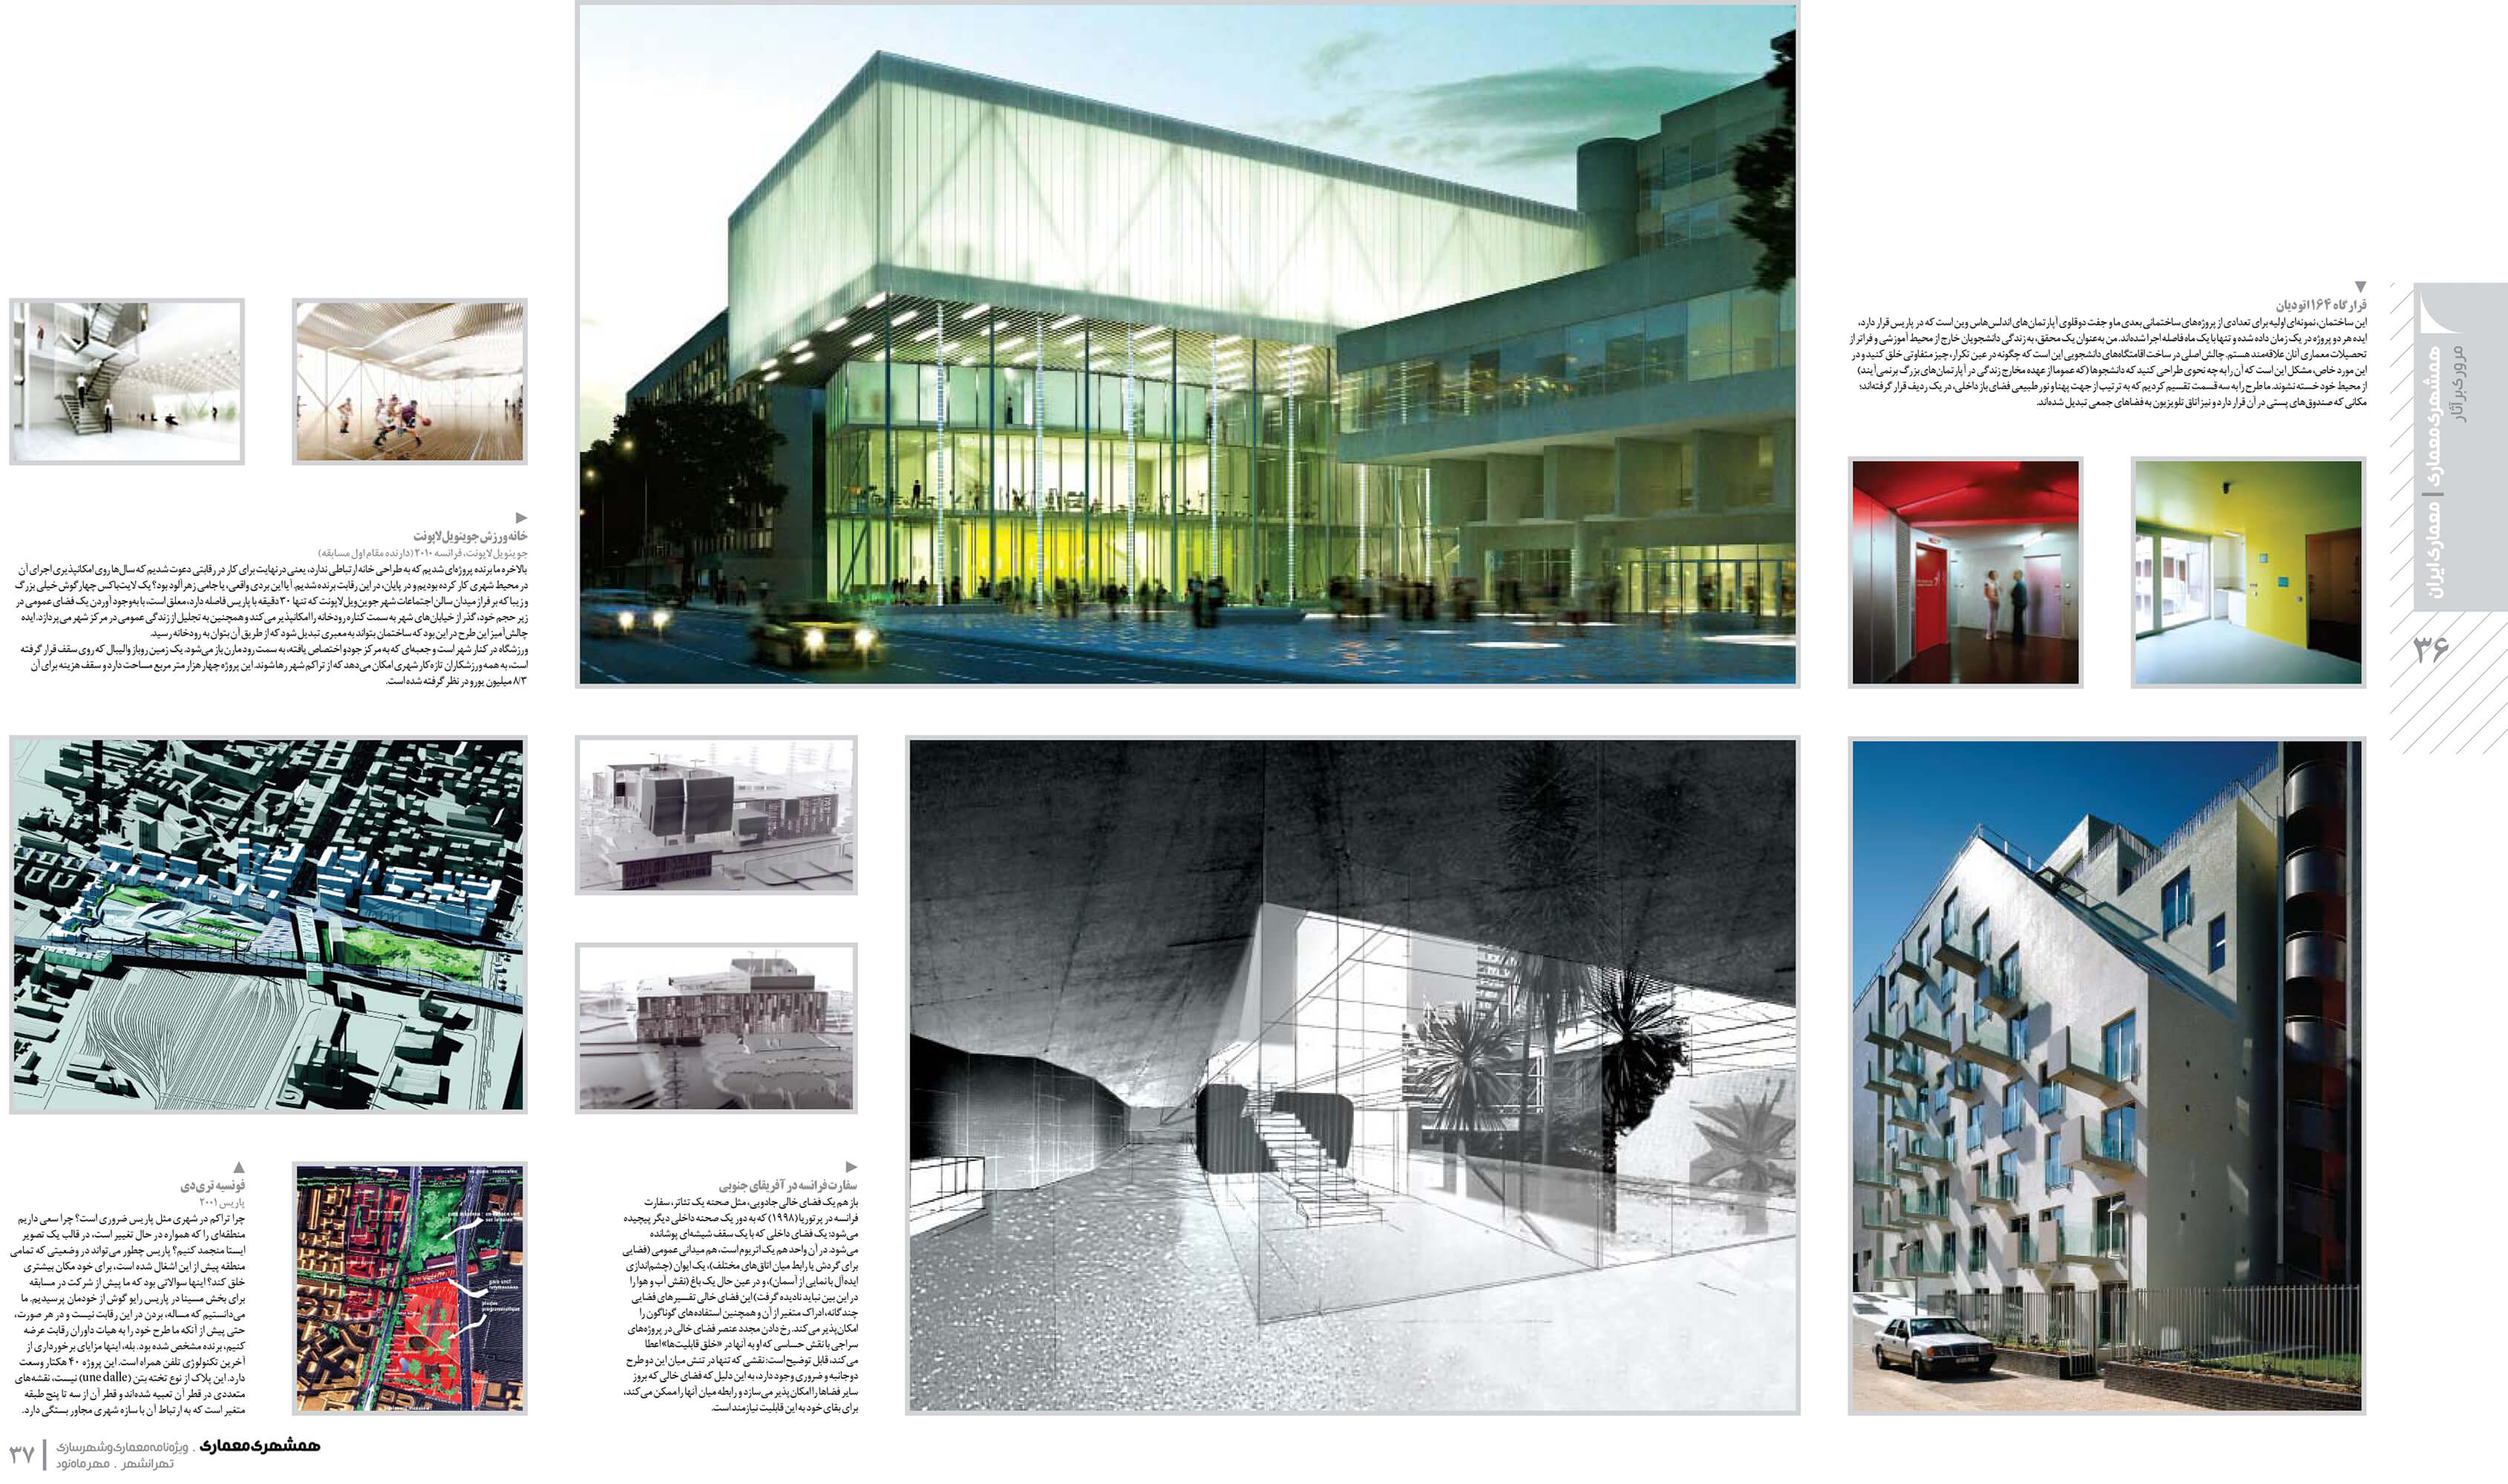 picture no. 5 of publication: Architecture and Questioning, author: Kambiz Moshtaq